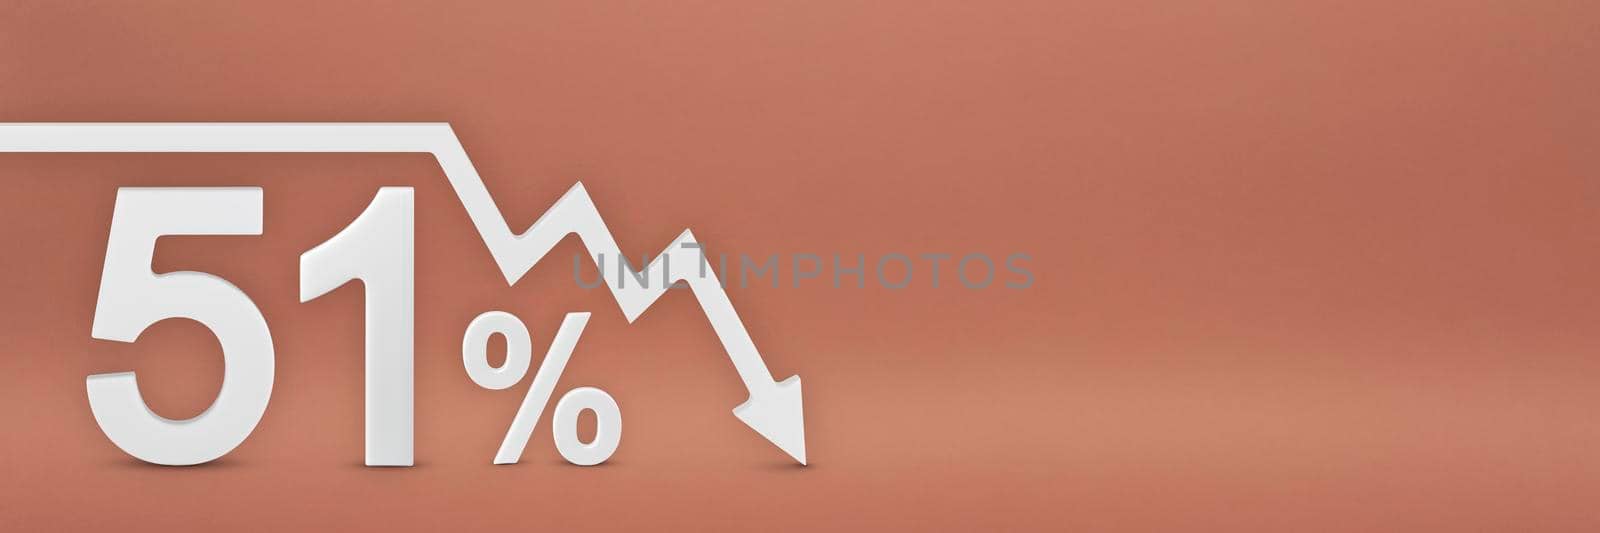 fifty-one percent, the arrow on the graph is pointing down. Stock market crash, bear market, inflation.Economic collapse, collapse of stocks.3d banner,51 percent discount sign on a red background